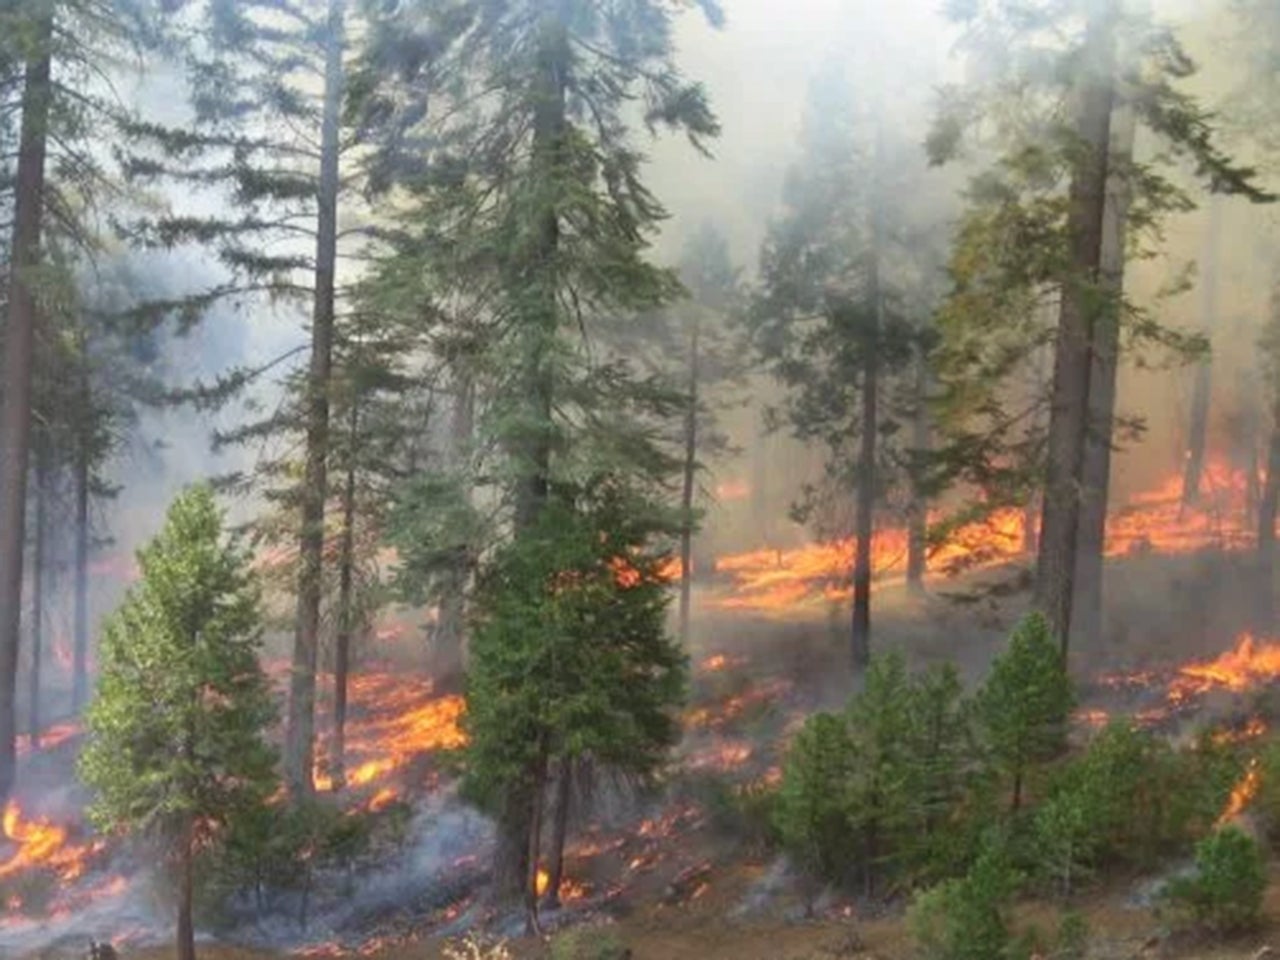 A low-severity prescribed burn in a low-density forest